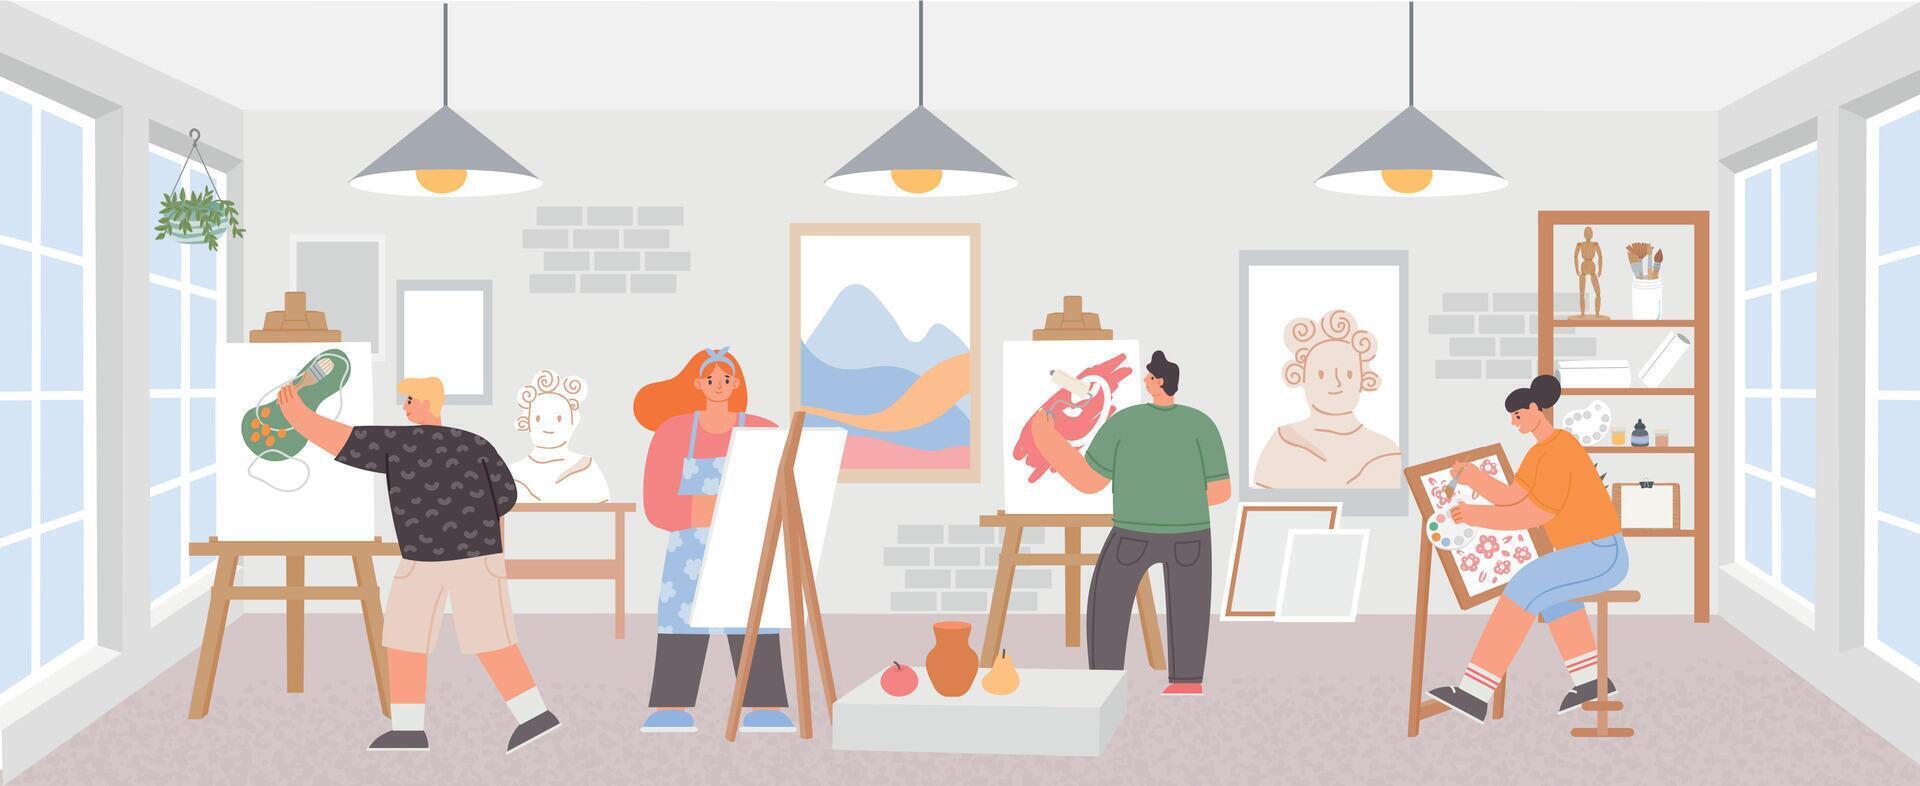 Workshop classroom with artists painting art work on easels. Painters man and woman. Creative draw courses studio, paint class vector poster